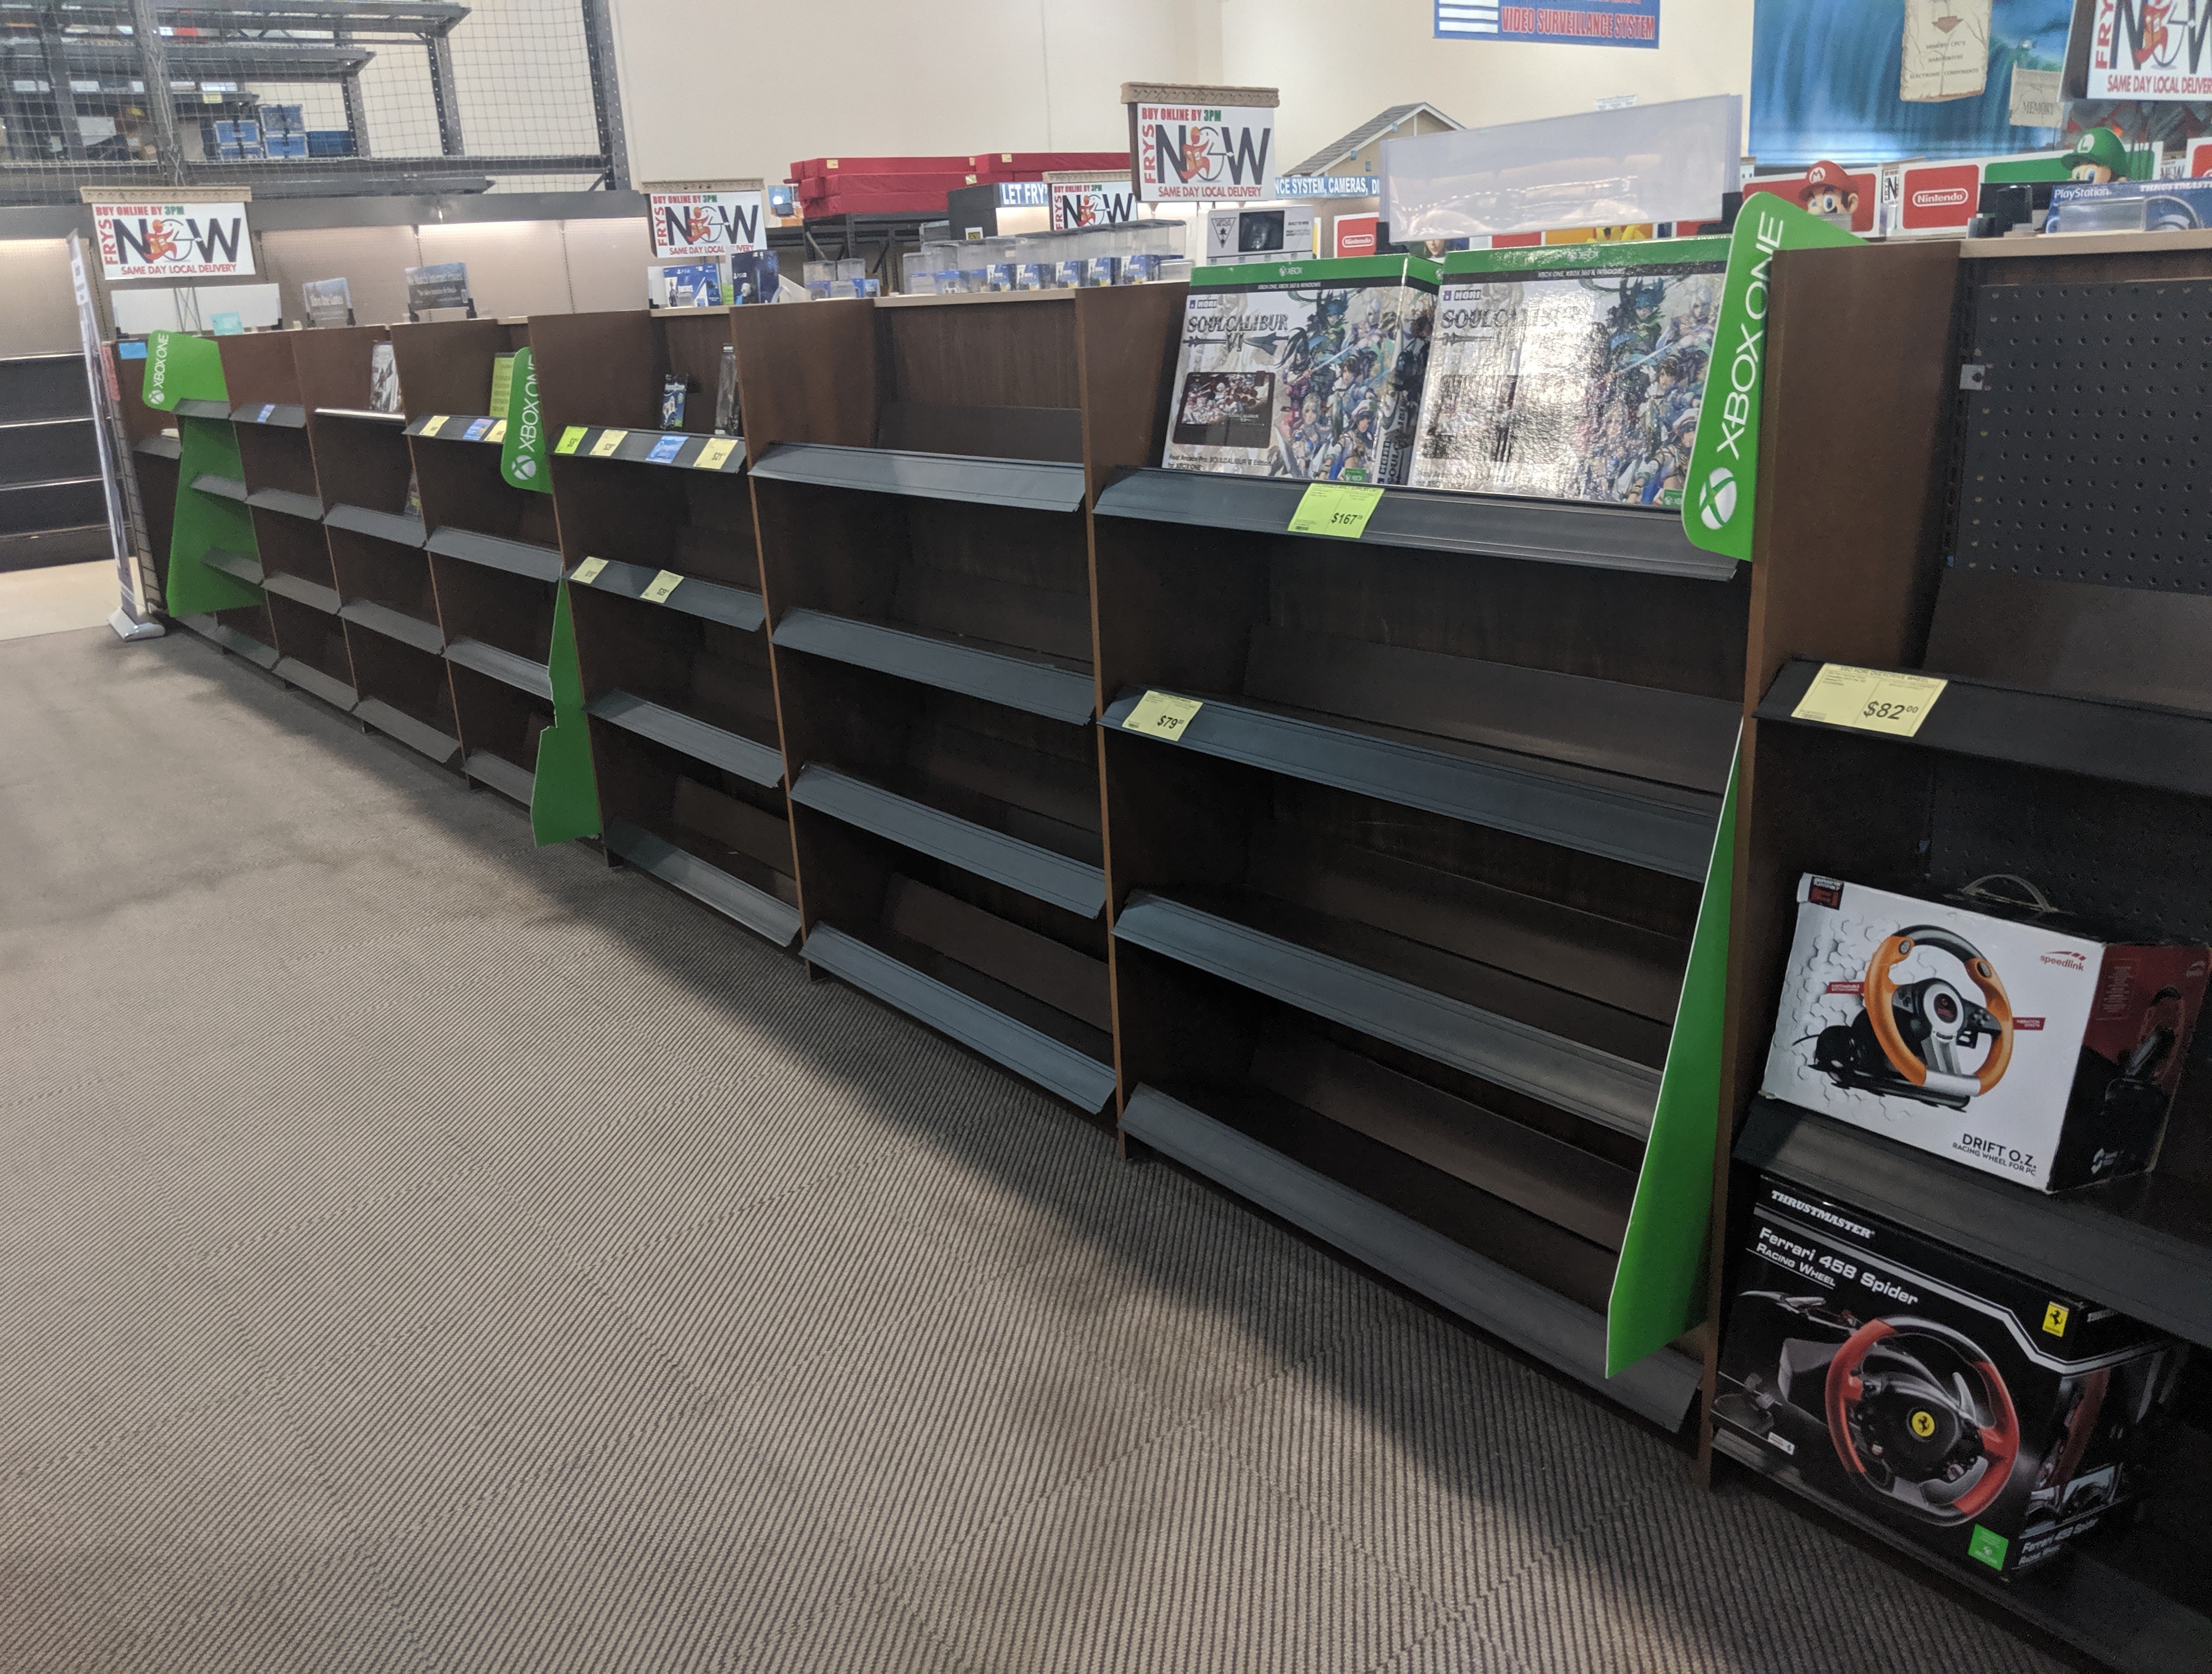 Is Fry's electronics going out of business?